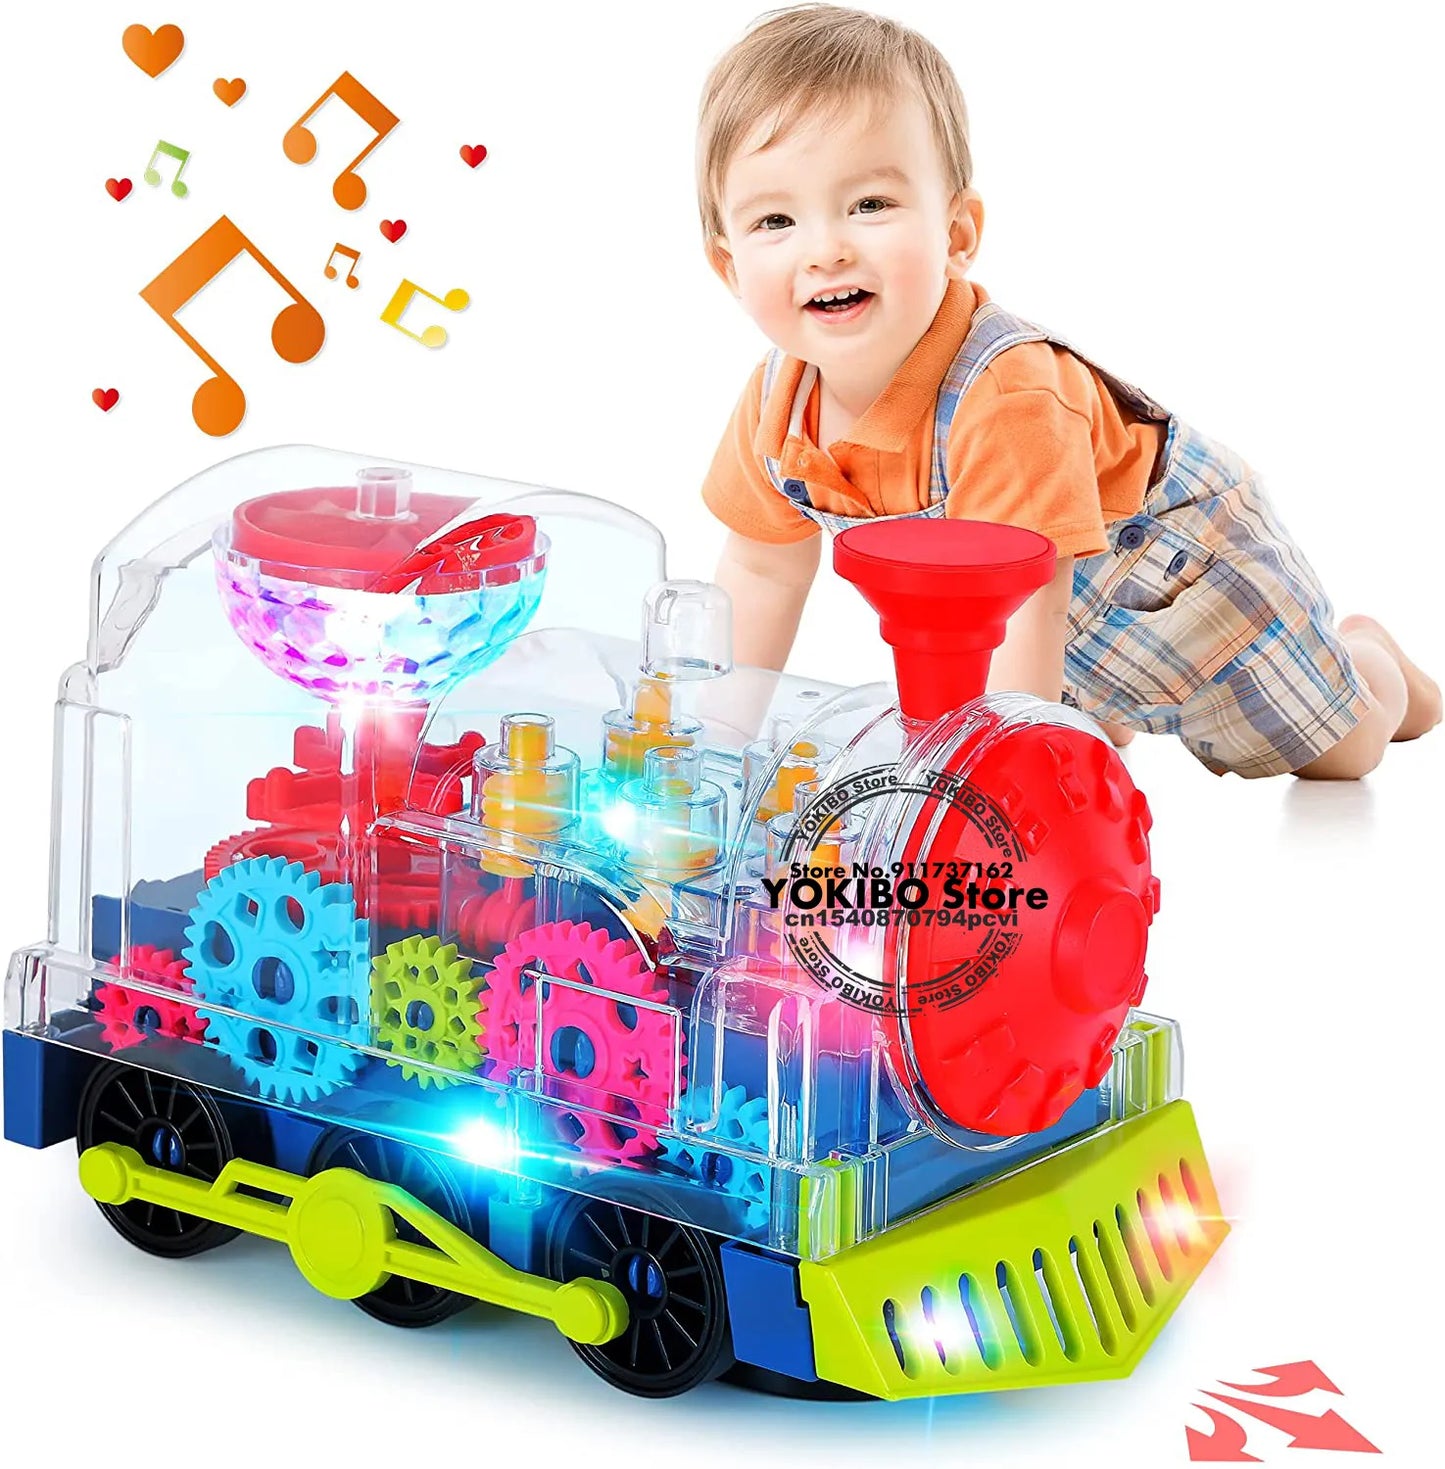 Electric Train Toy for Kids Toddlers: Interactive Learning Fun